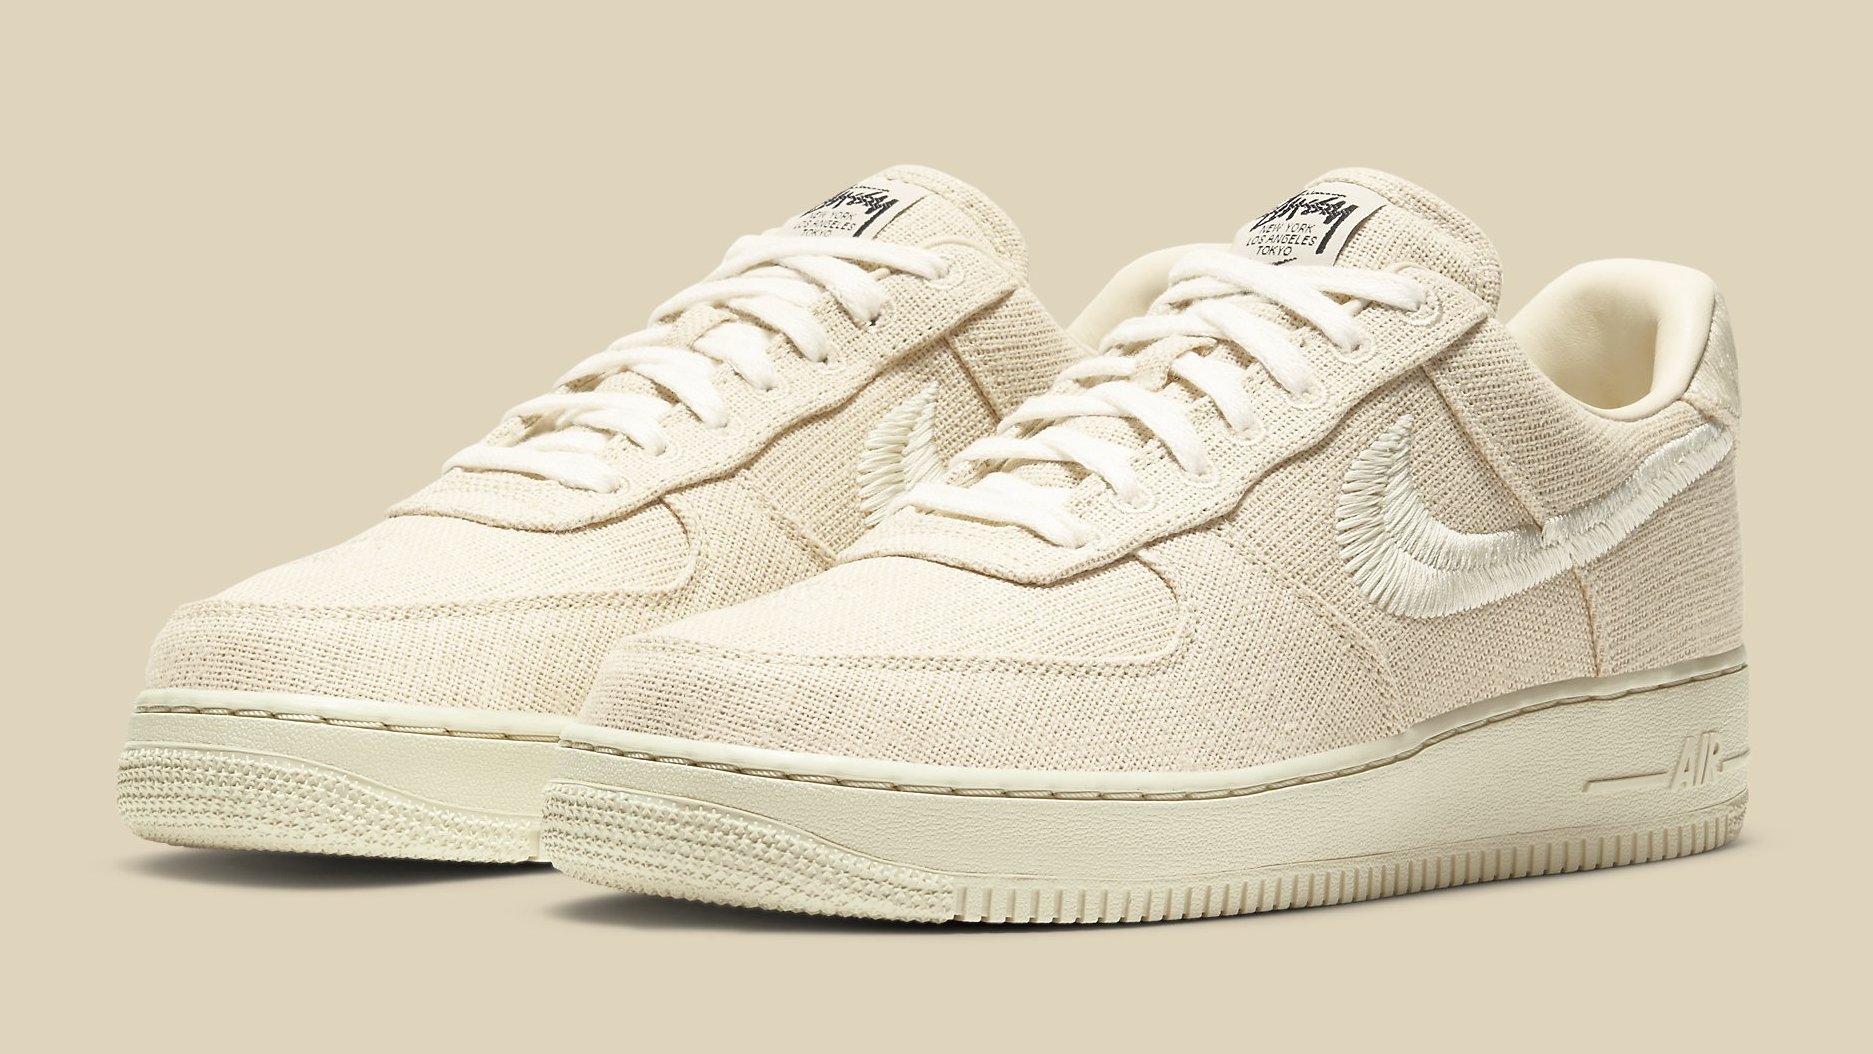 STUSSY NIKE AIR FORCE 1 LOW FOSSIL STONE